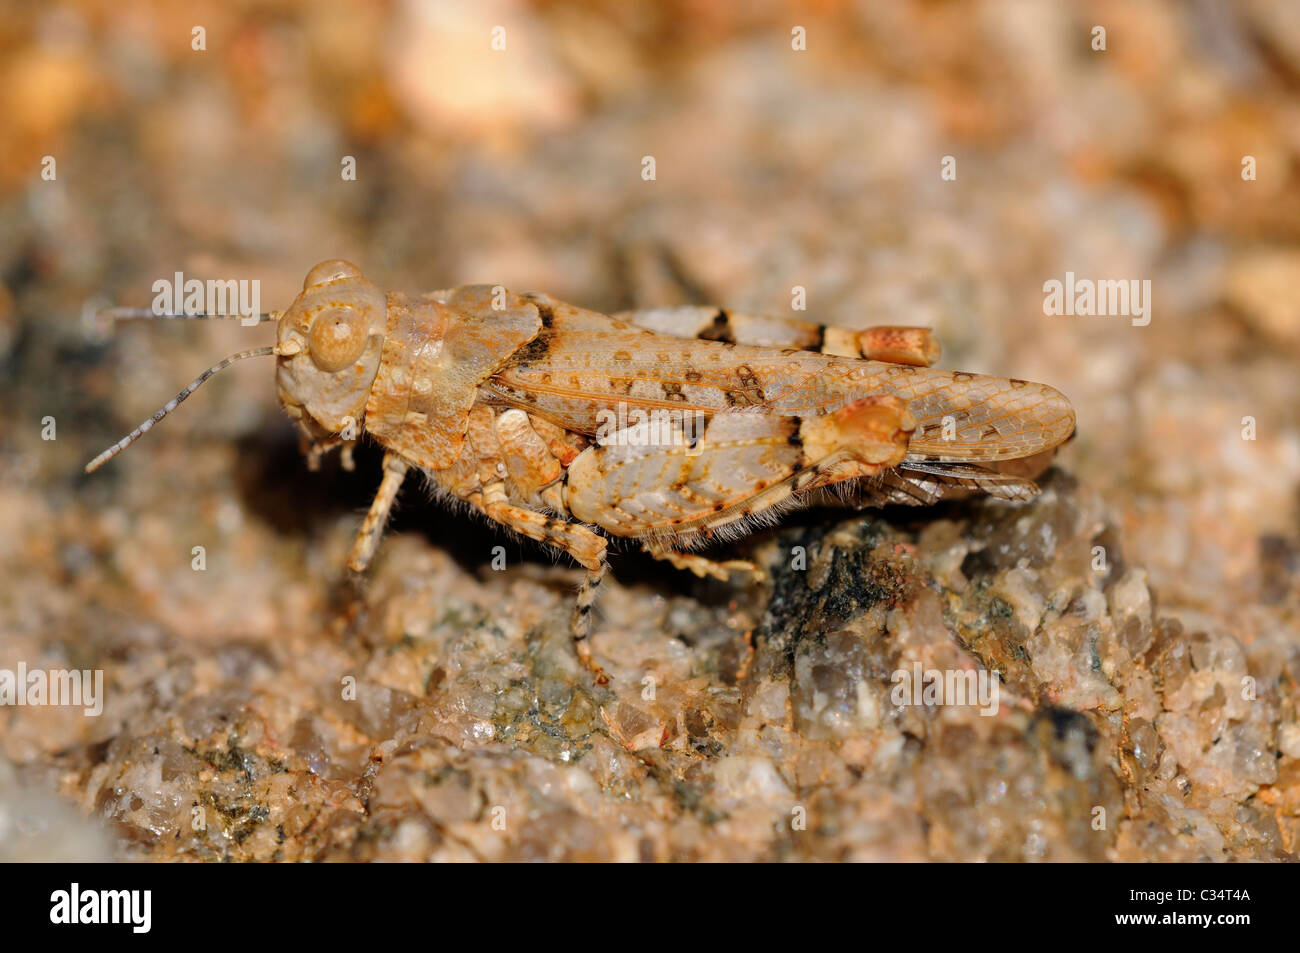 Short-horned grasshopper, Rhachitopsis, mimicking the colors of the ground, Namqualand, South Africa Stock Photo